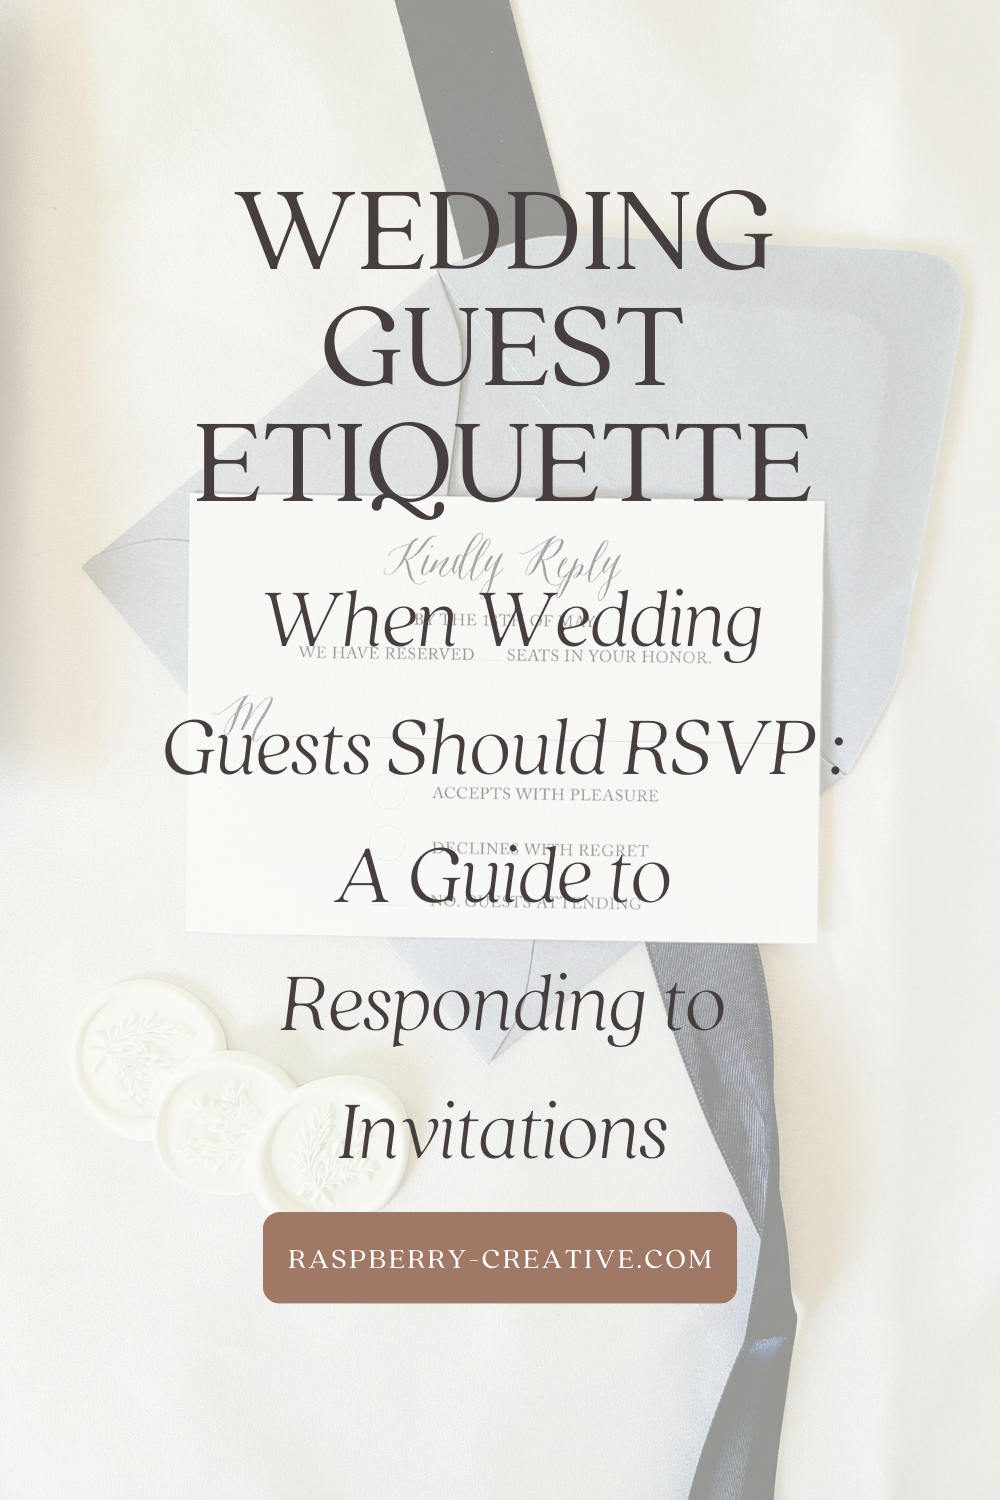 When Wedding Guests Should RSVP By: A Guide to Responding to Invitations